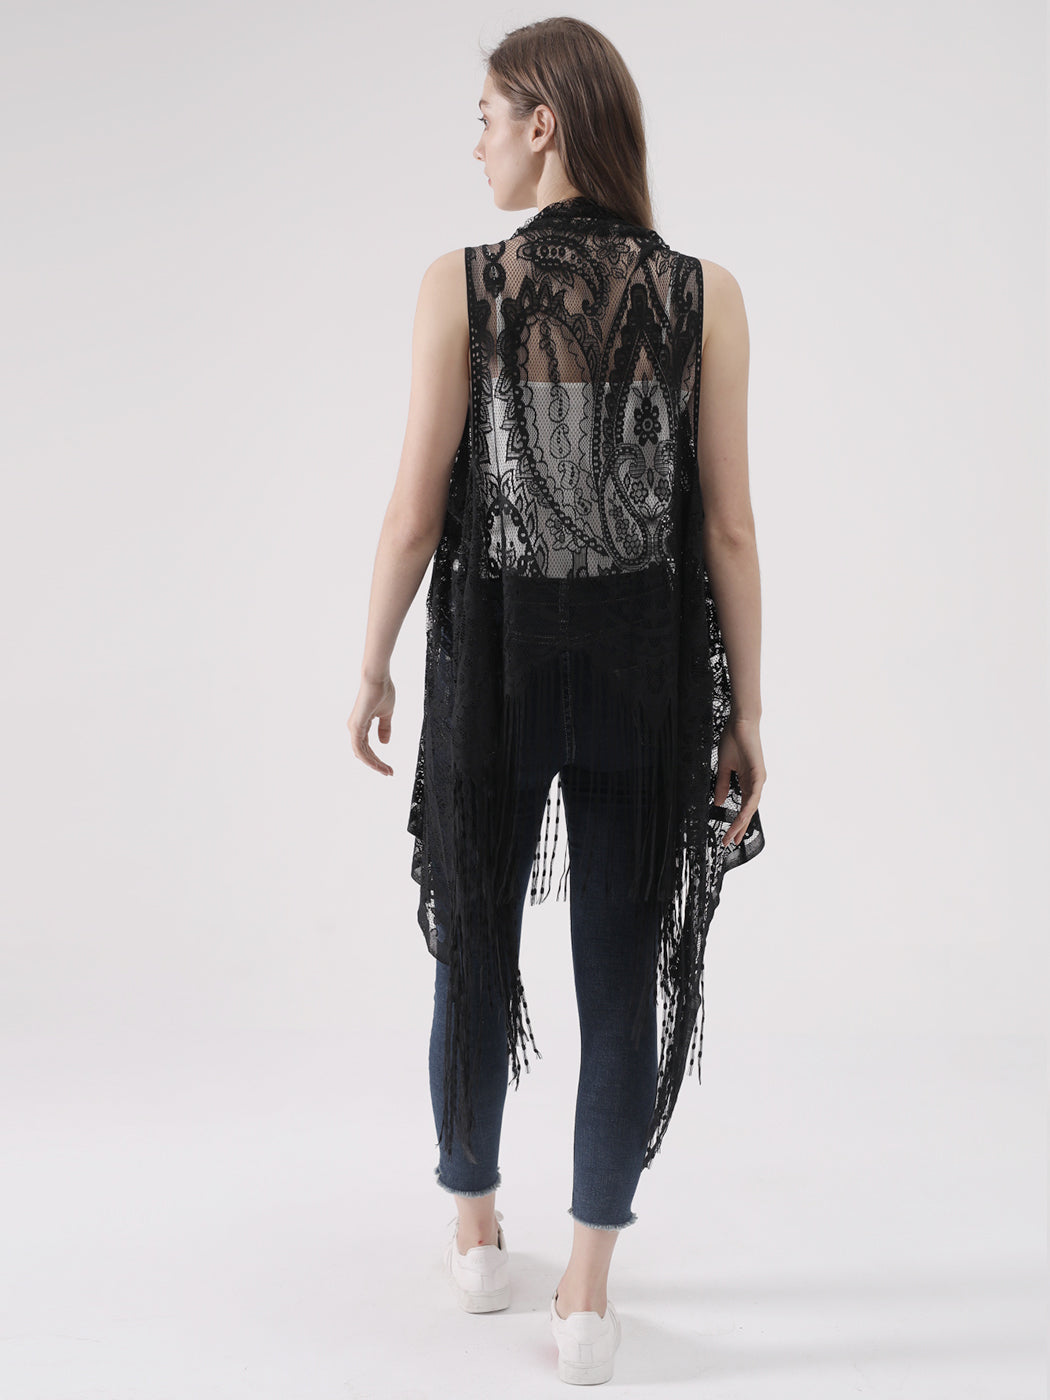 Sexy Lace Cardigan Hollow Out Perspective Irregular Vest Open Front Crochet Tops